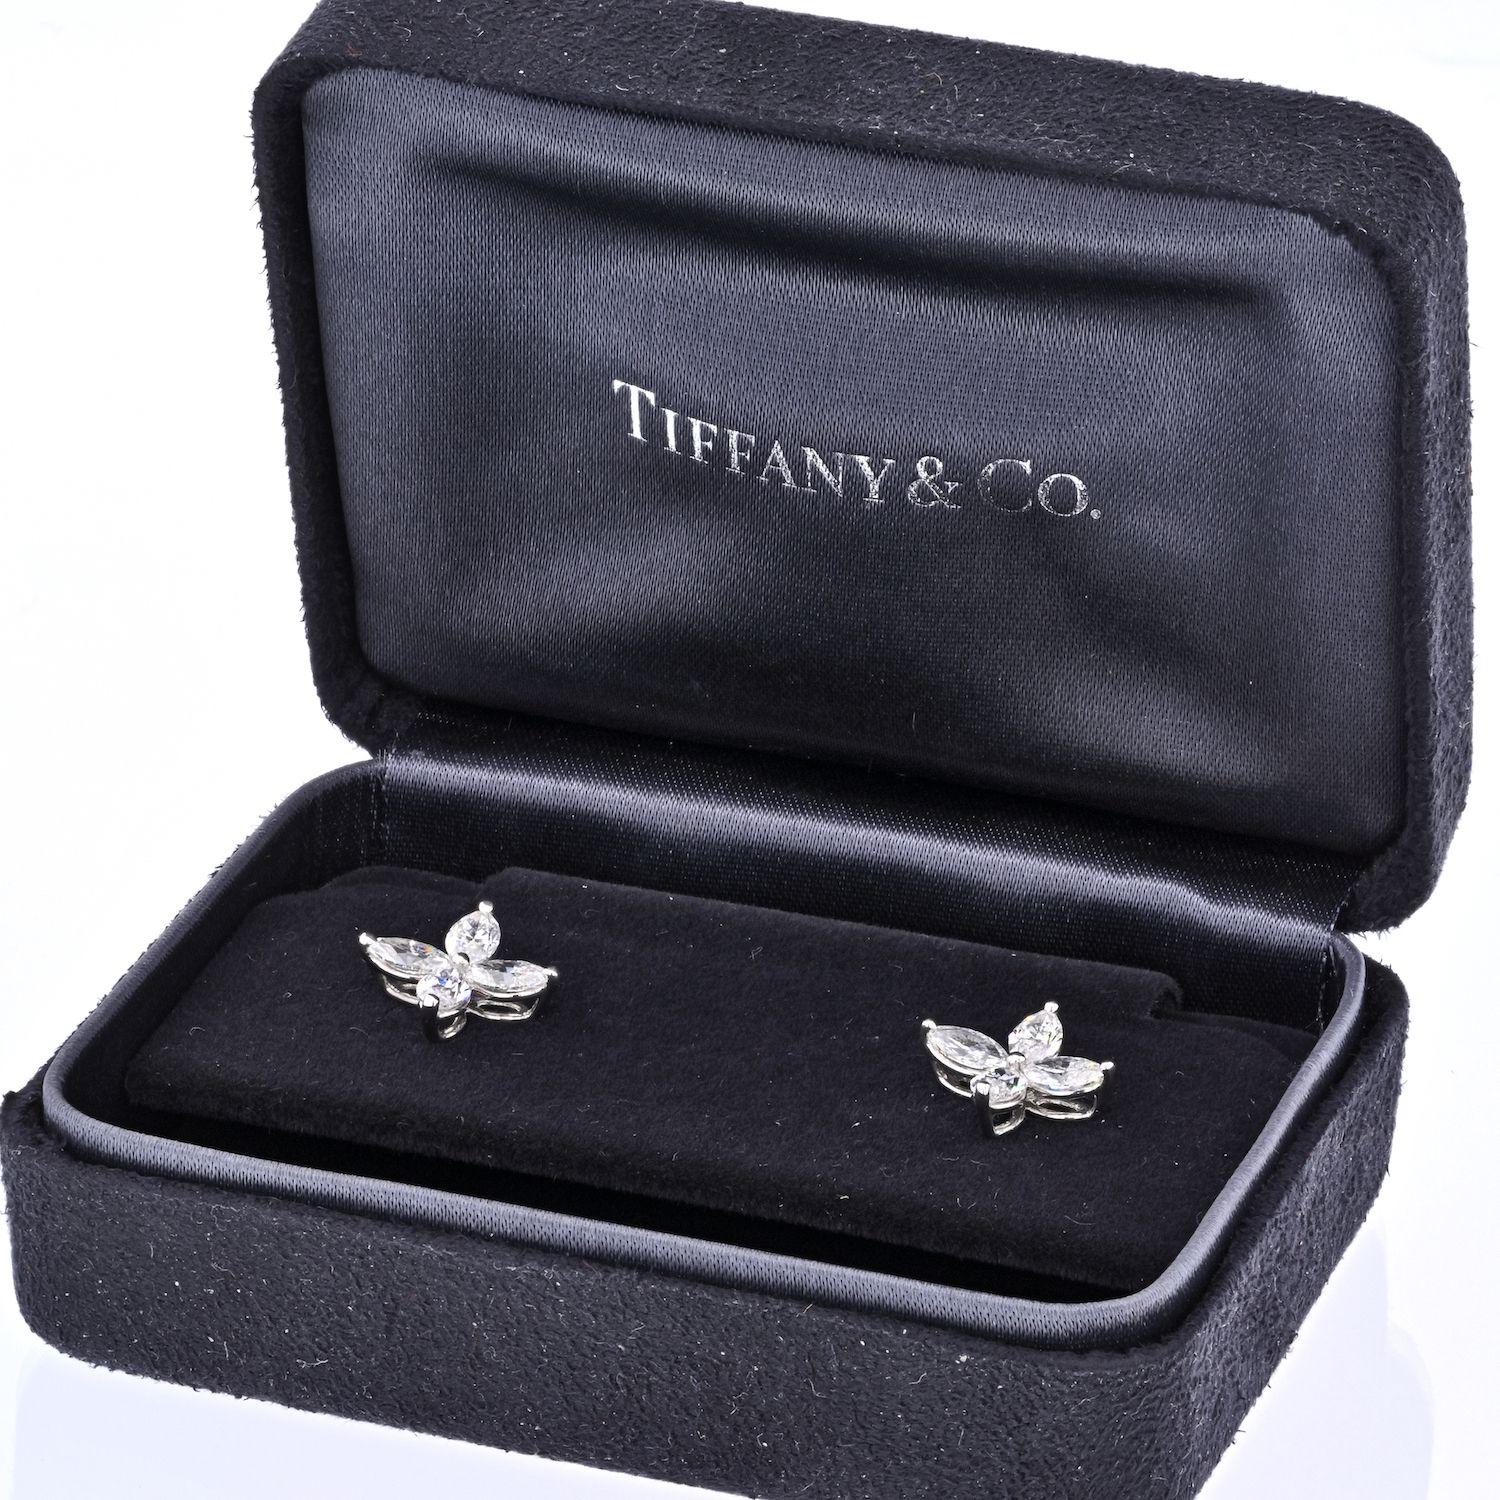 These are lovely stud earrings by Tiffany & Co. From the Victoria collection these lovely earrings are mounted with 1.62cts of marquise cut diamonds. Fully signed. 
Superb diamond quality by Tiffany at a fraction of a retail price. 
Get these now